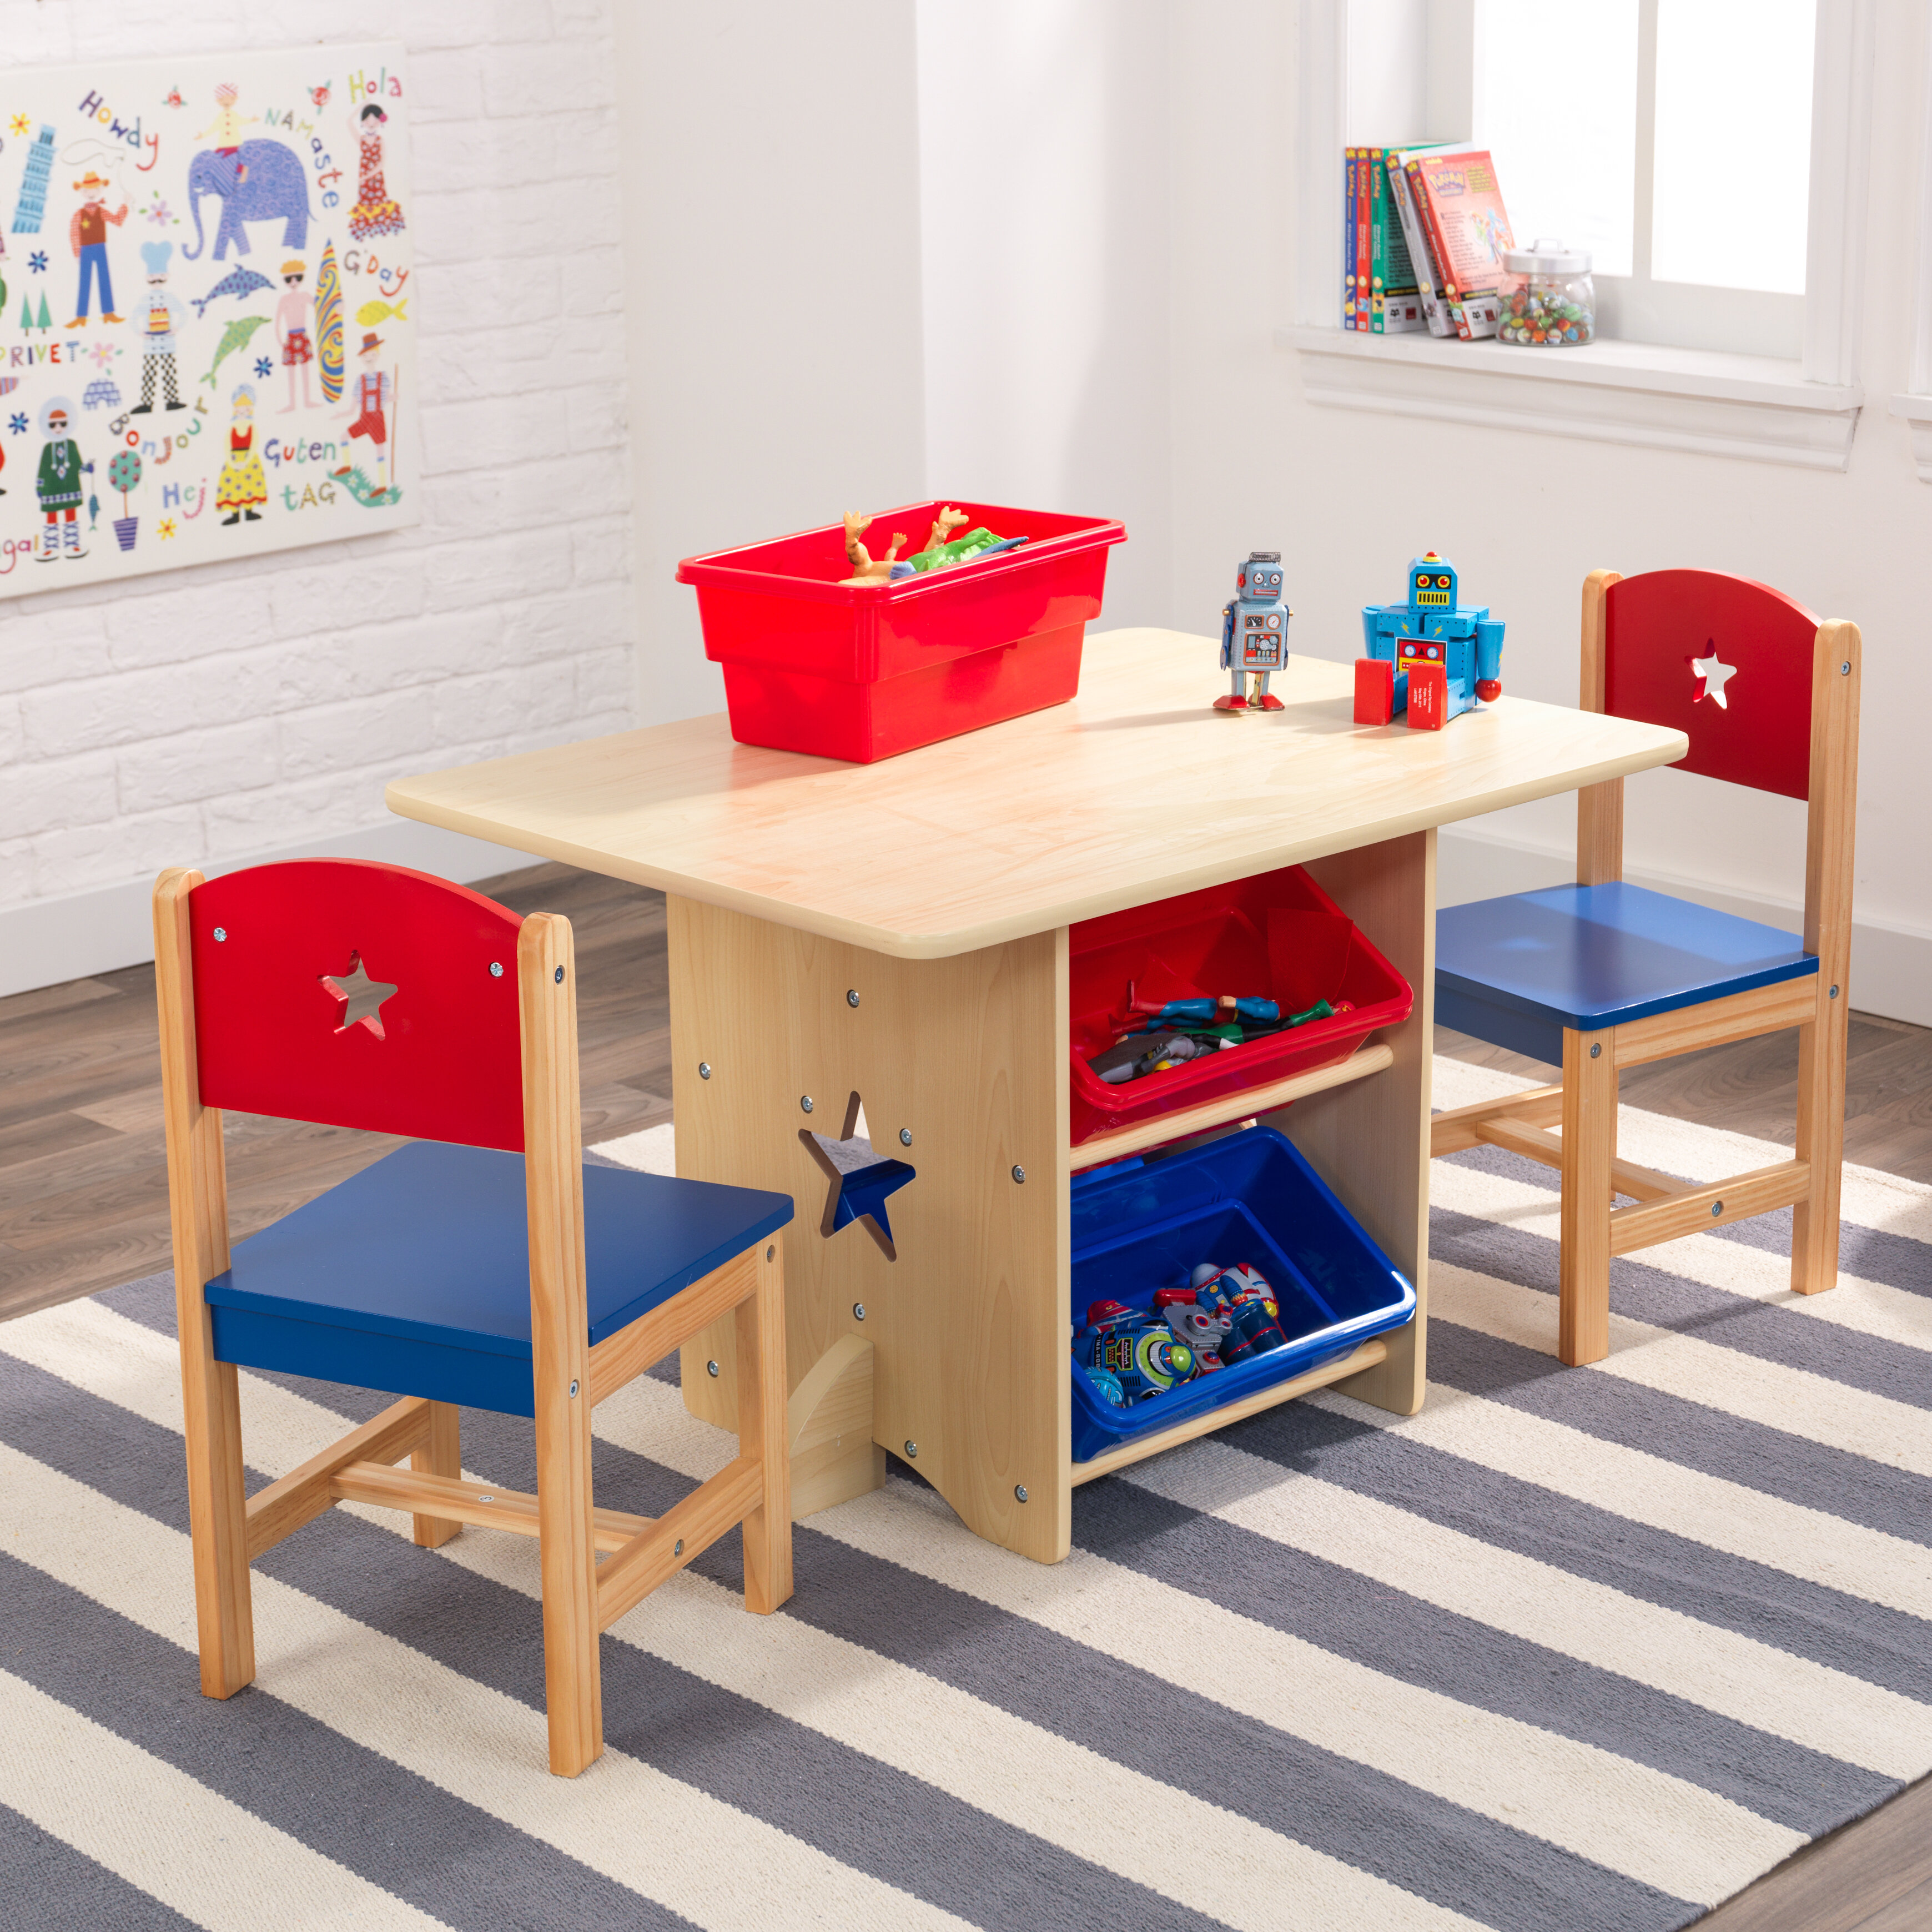 children's fold up table and chairs